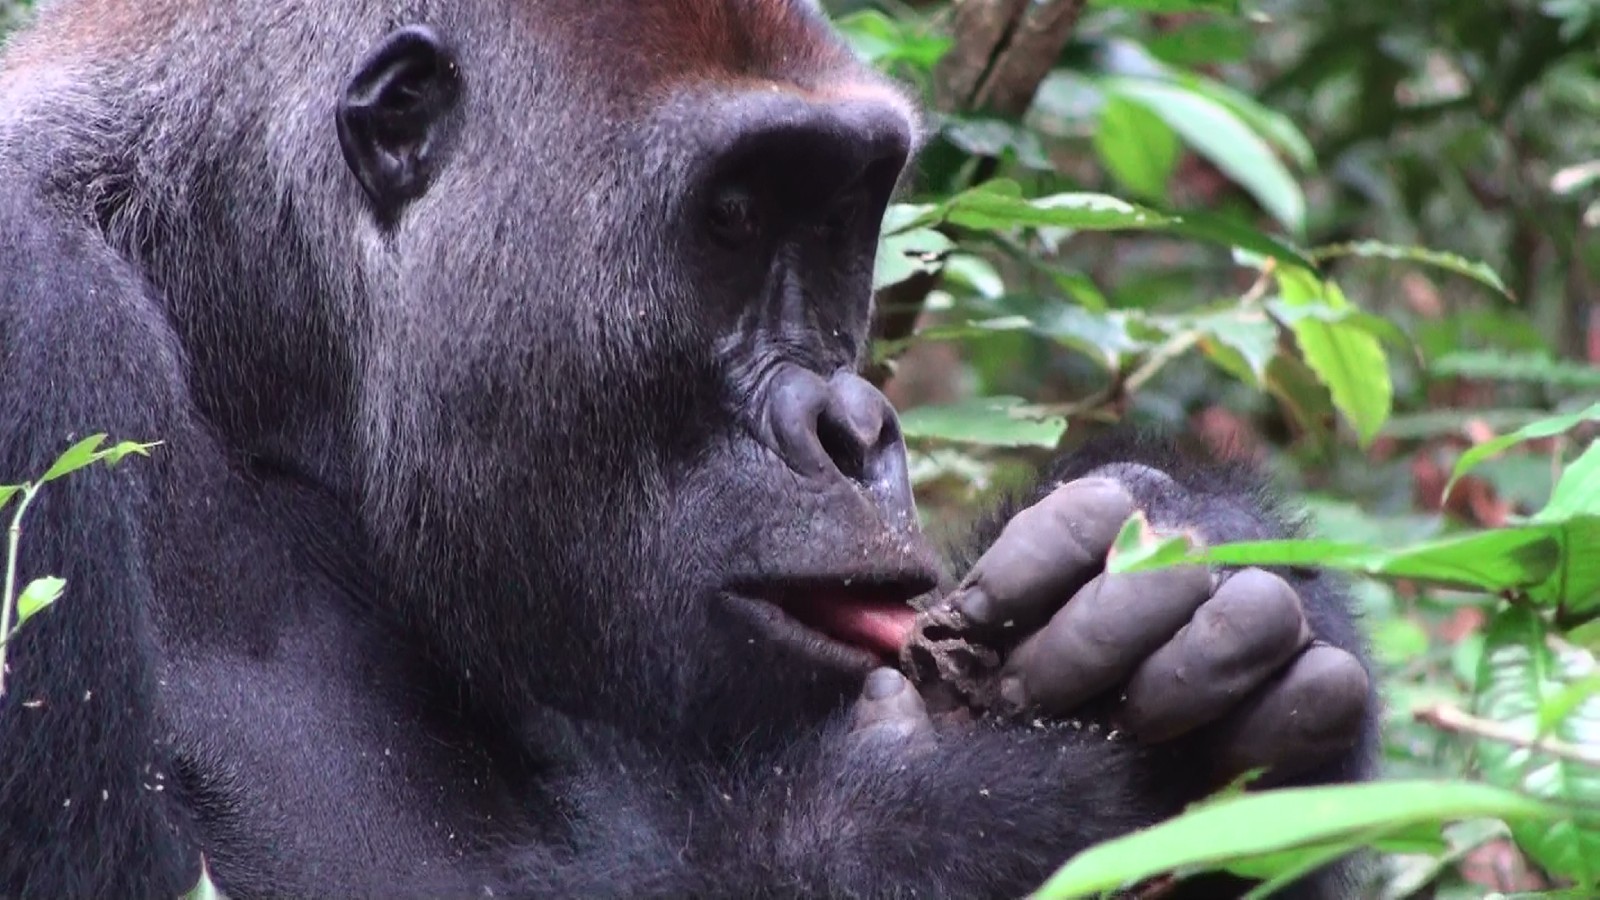 A gorilla in the jungle licking termites off his fingers.